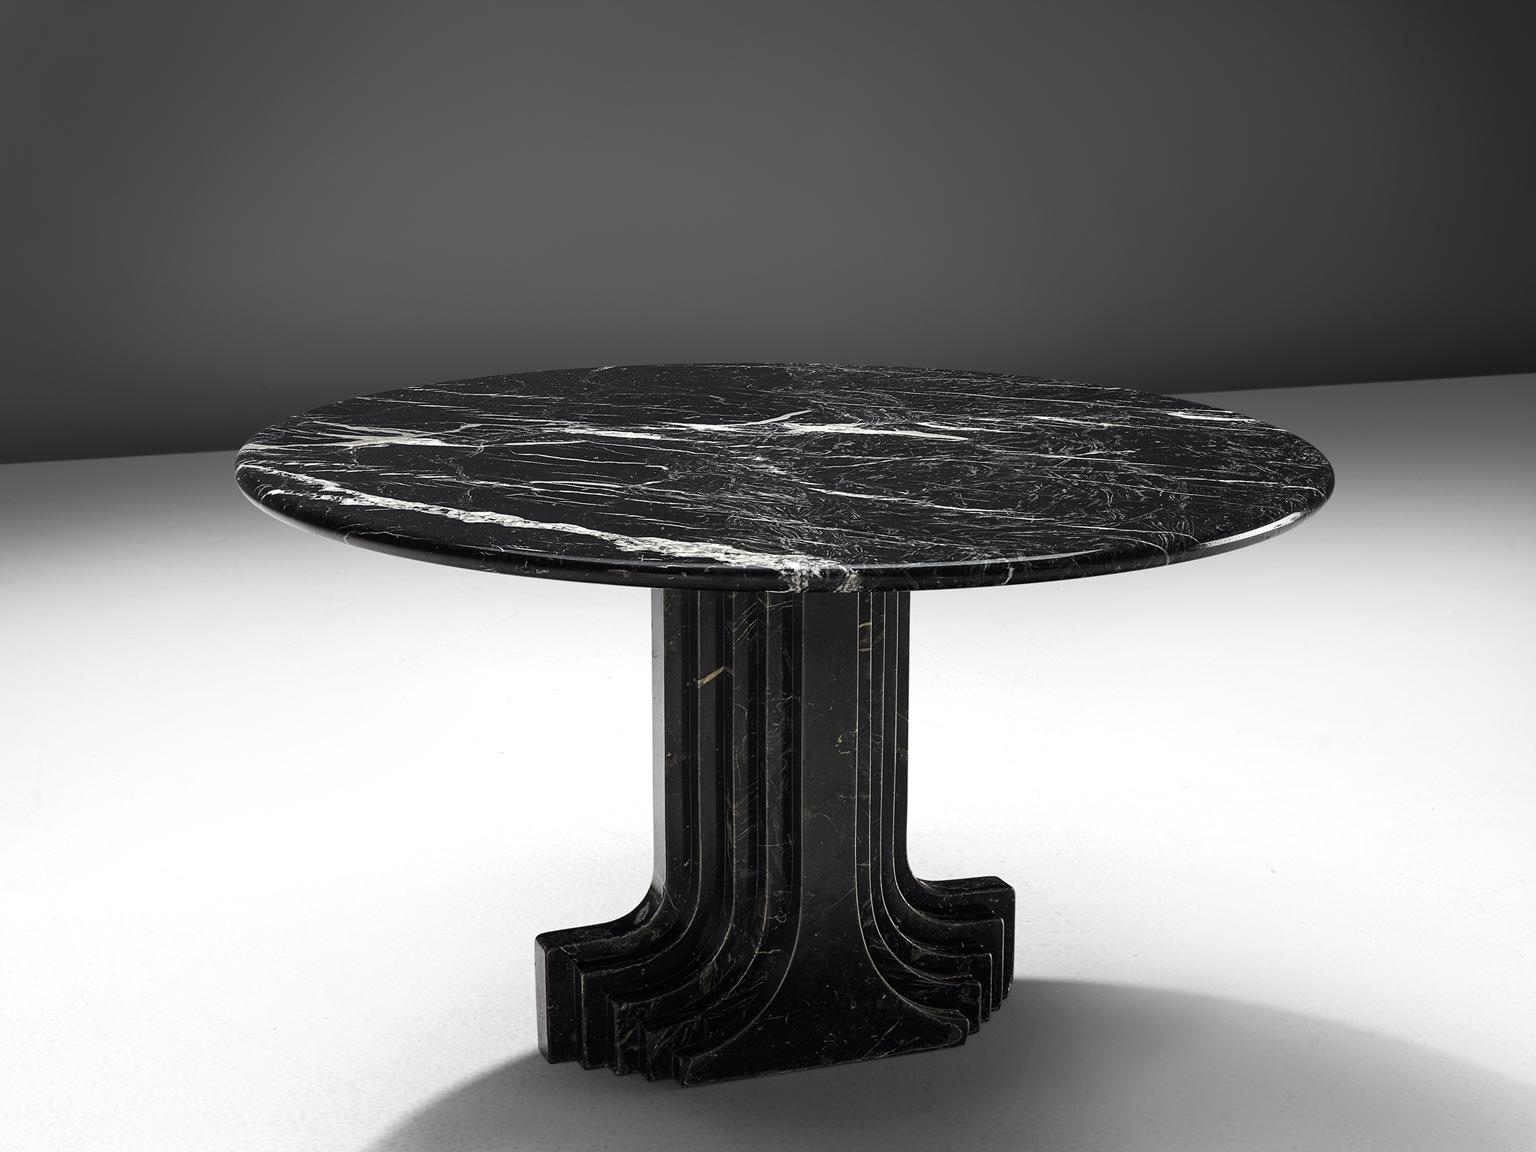 Carlo Scarpa reeditioned by Simon, 'Argo' travertine table, Italy, 1980s.

The base of the table is formed out of a pillar that seems to be built up of several pillars in a row, clearly a reference to the architectural influence that Scarpa is